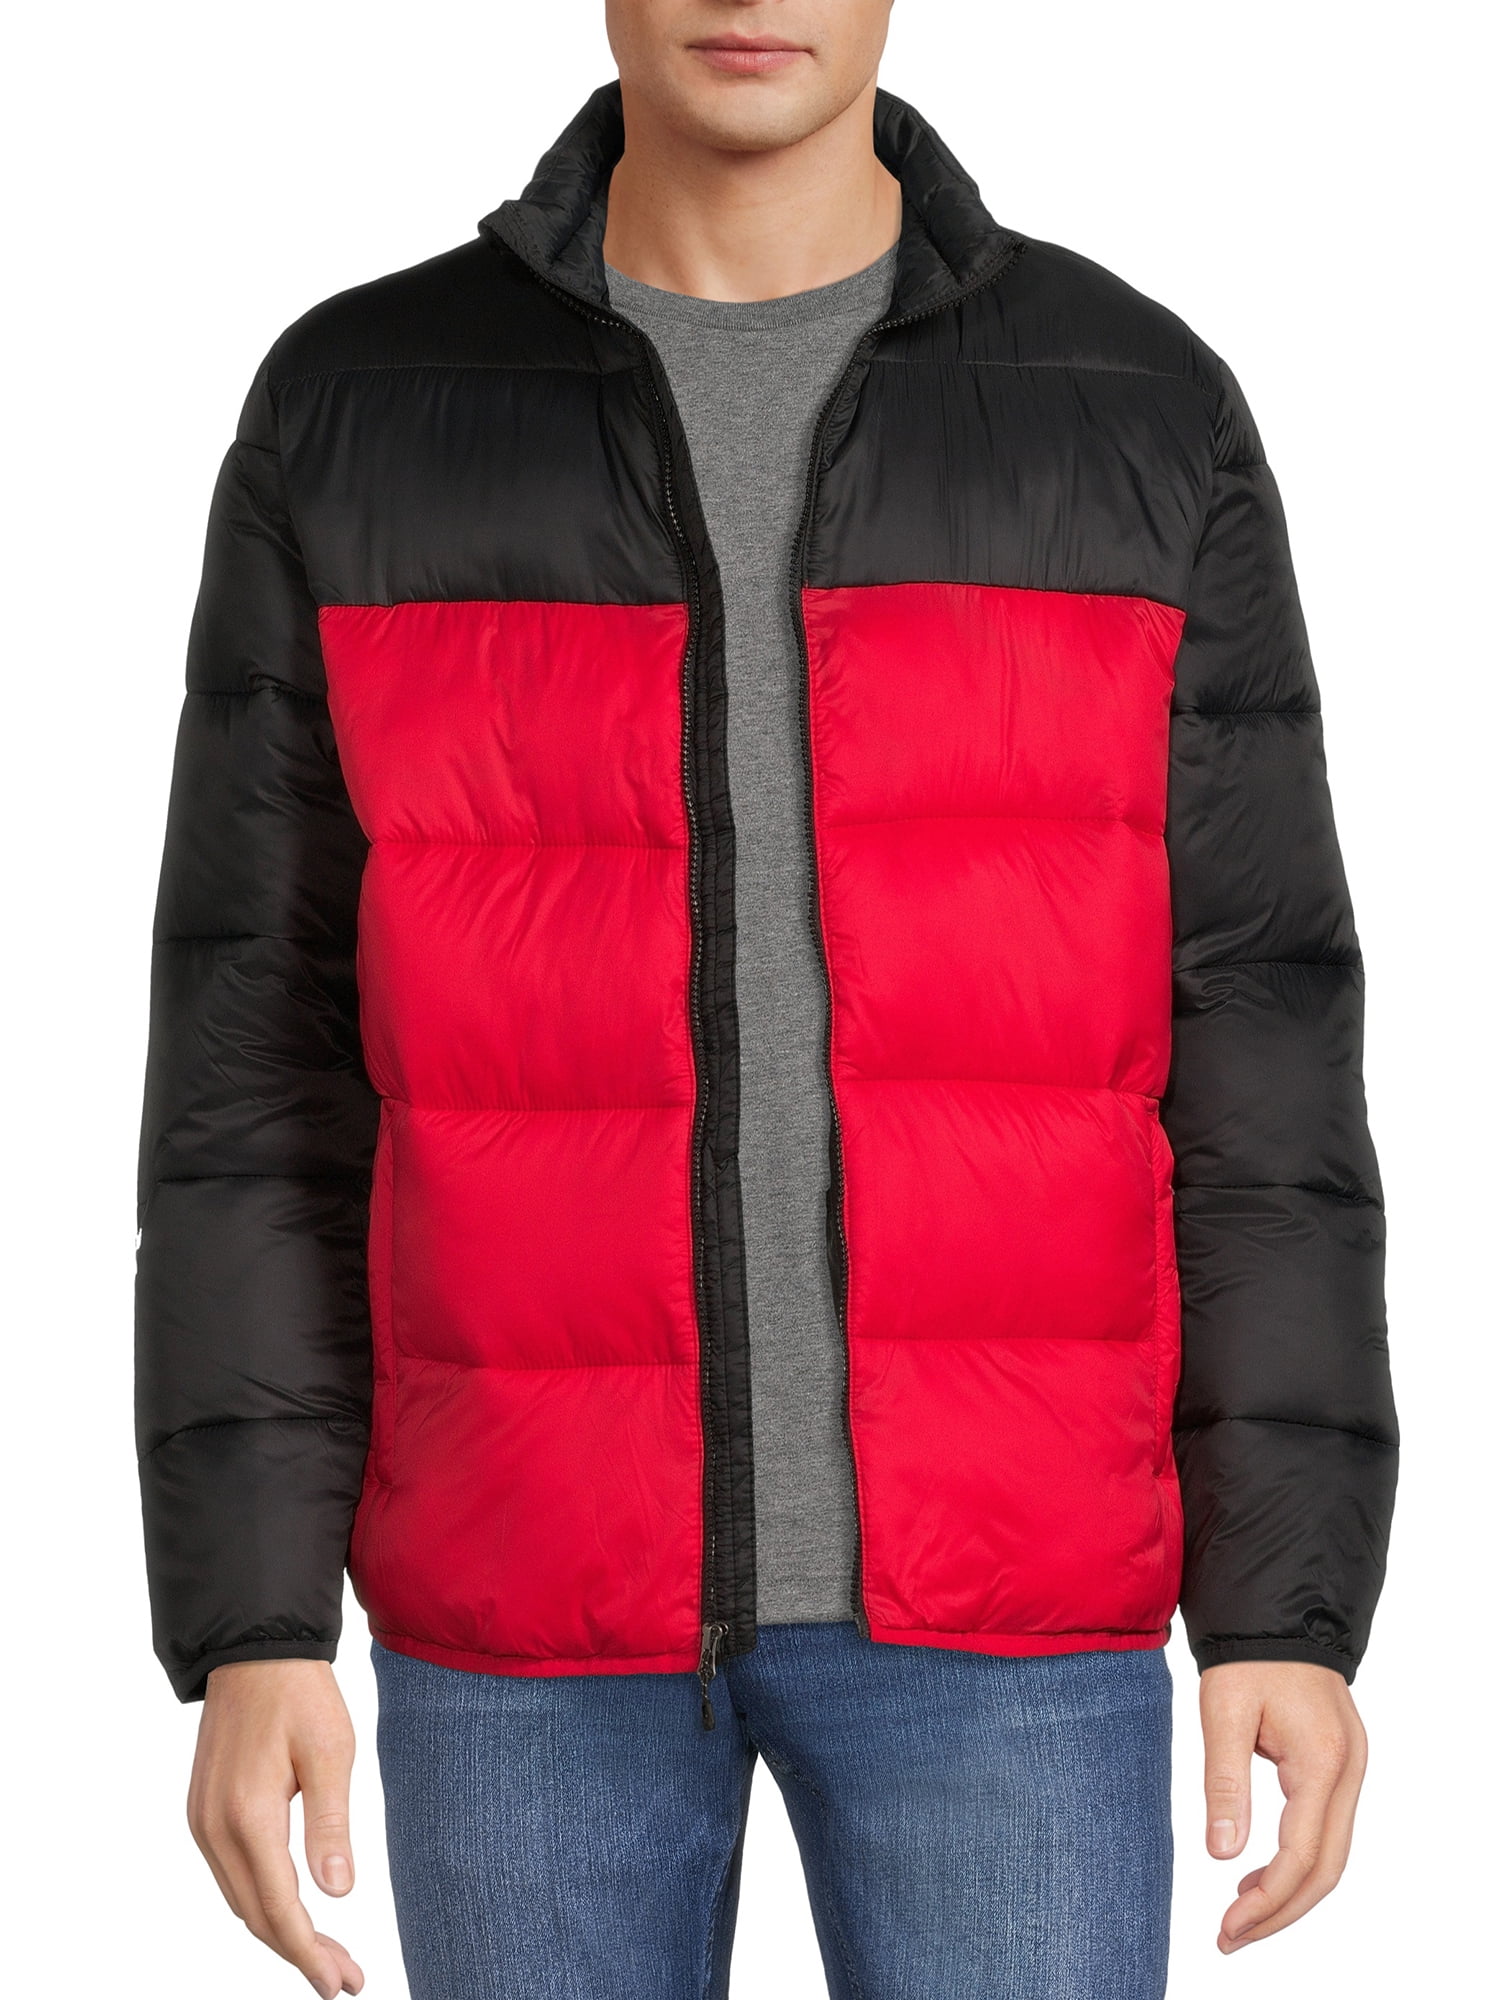 Wholesale Men's Hooded Puffer Winter Coat 100 / Assorted Sizes